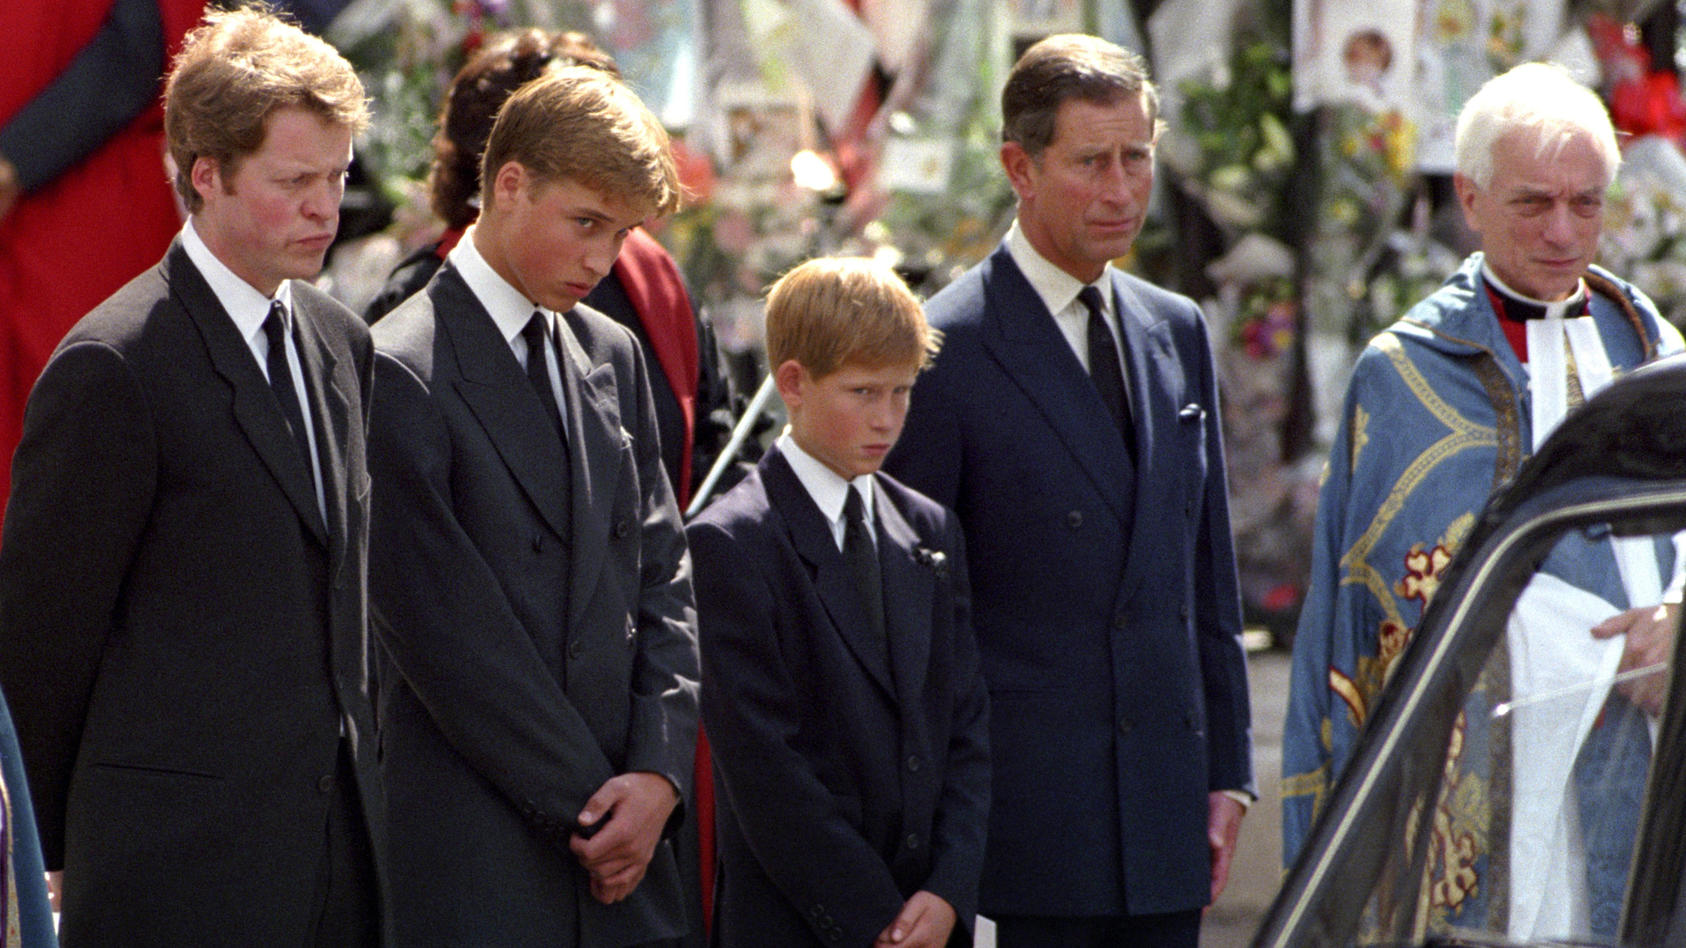 Royal engagement.File photo dated 06/09/97 of (left to right) The Earl Spencer, Prince William, Prince Harry and The Prince of Wales, waiting as the hearse carrying the coffin of Diana, Princess of Wales prepares to leave Westminster Abbey, following